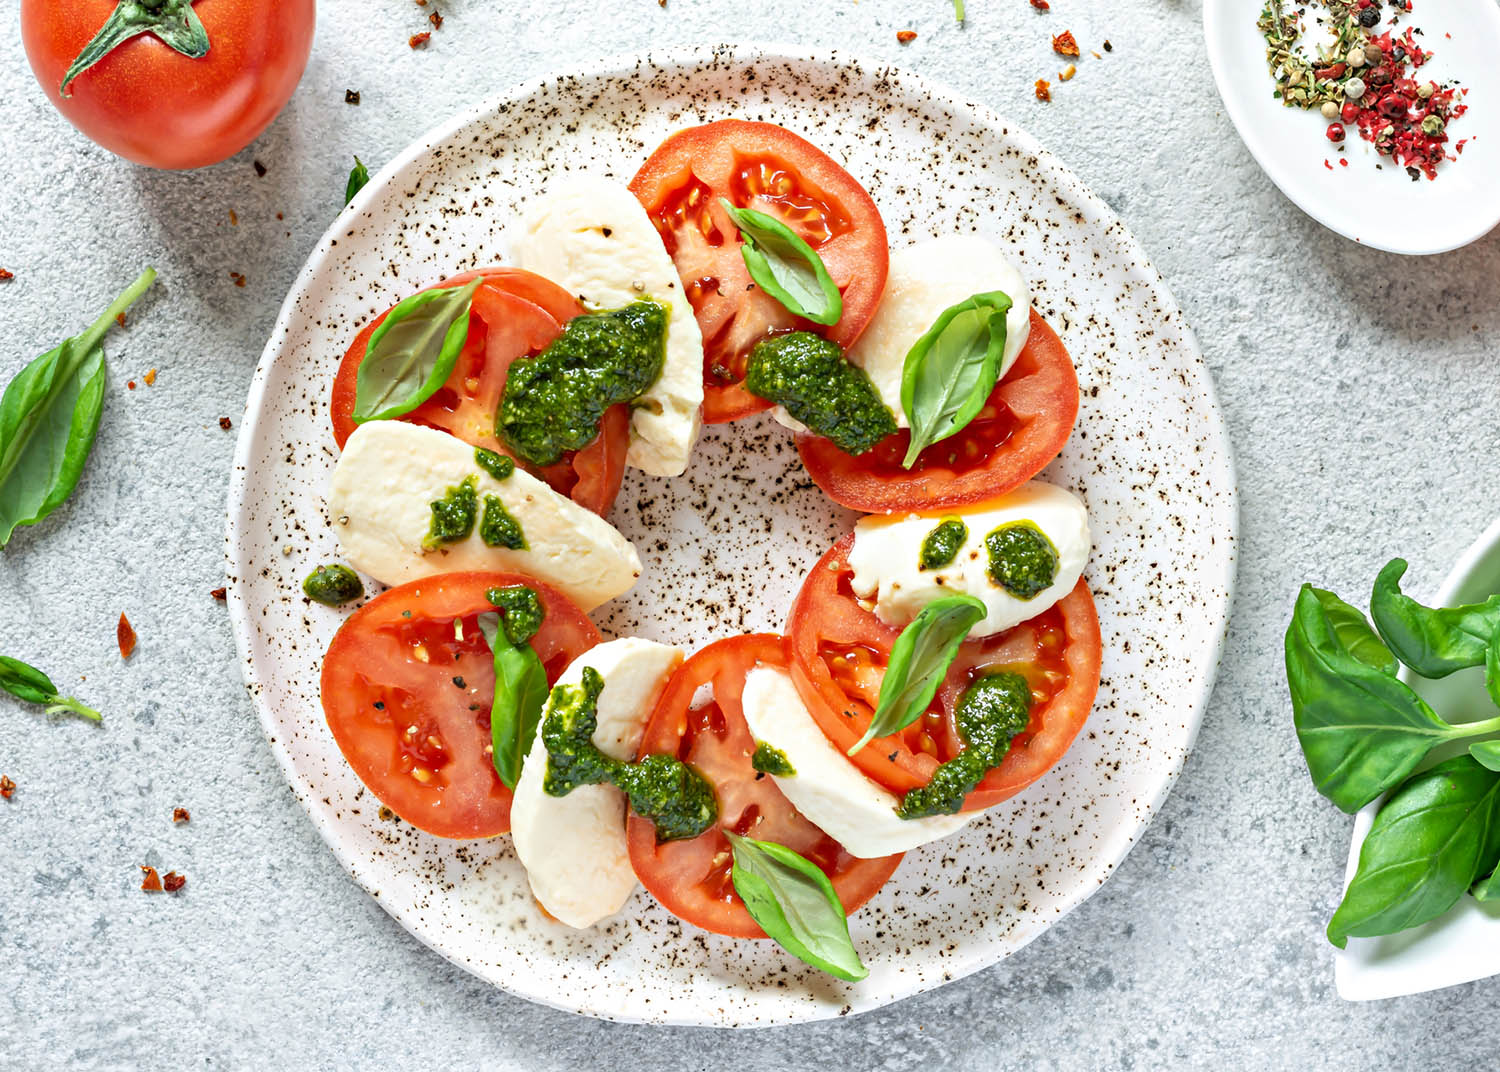 Caprese salad with juicy tomatoes, fresh mozzarella and pesto. Concept for a tasty and healthy appetizer, flat lay. Italian food, cuisine.